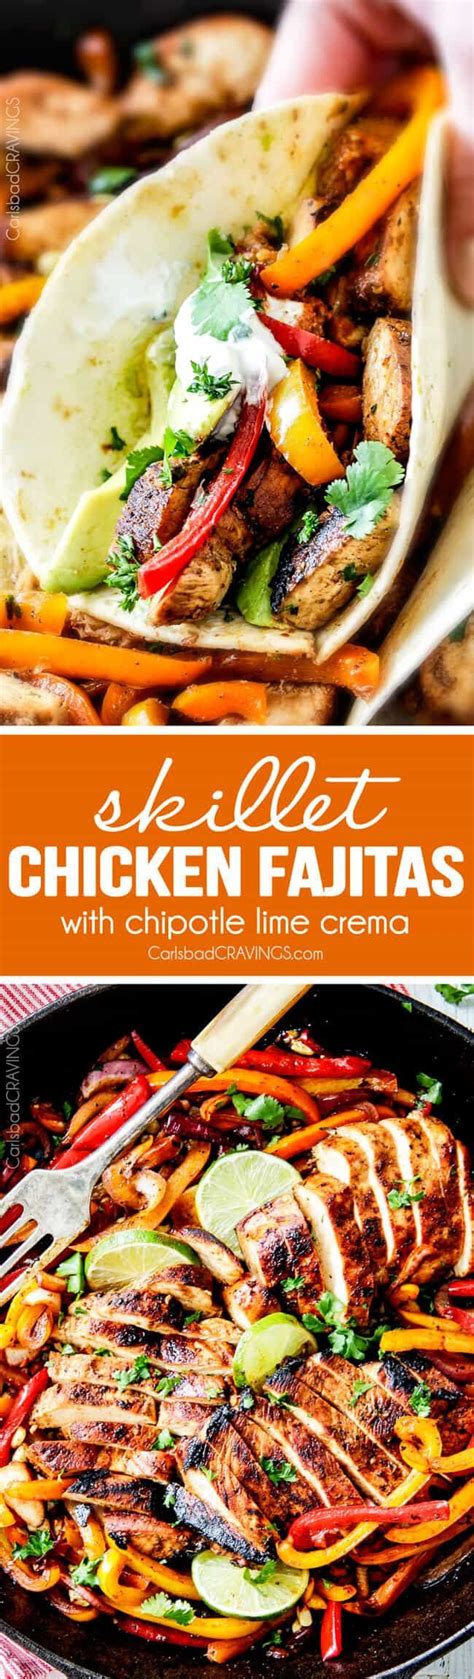 Easy Skillet Chicken Fajitas These Are The Best Chicken Fajitas The Marinade Is Seriously The